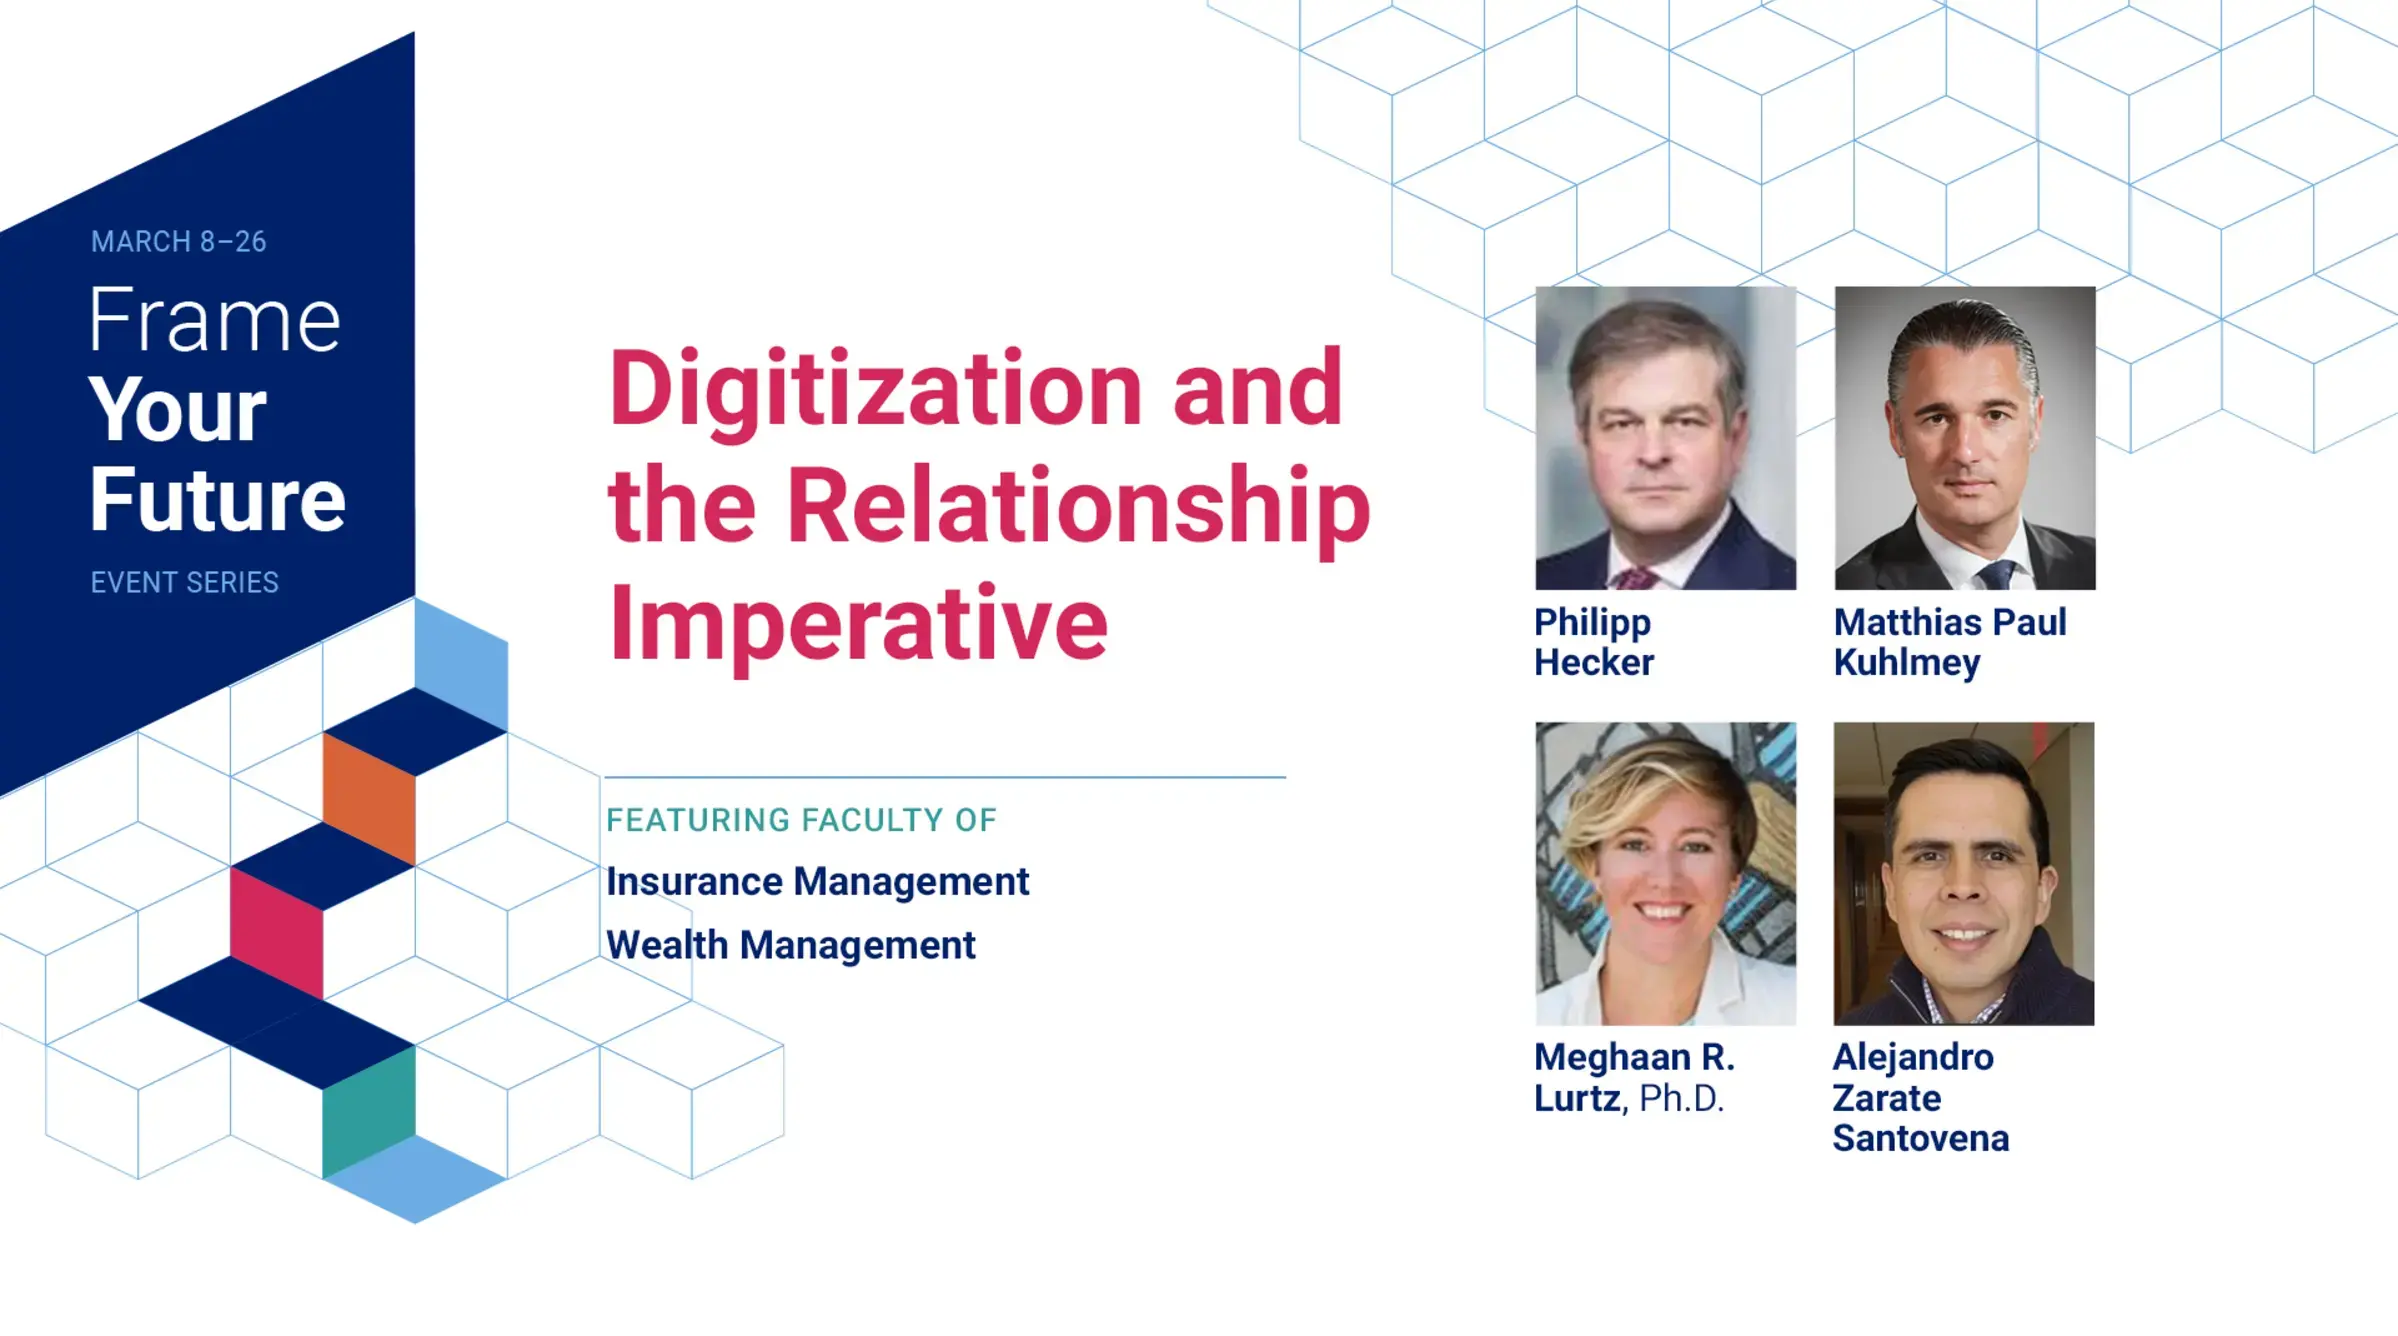 Digitization and the Relationship Imperative